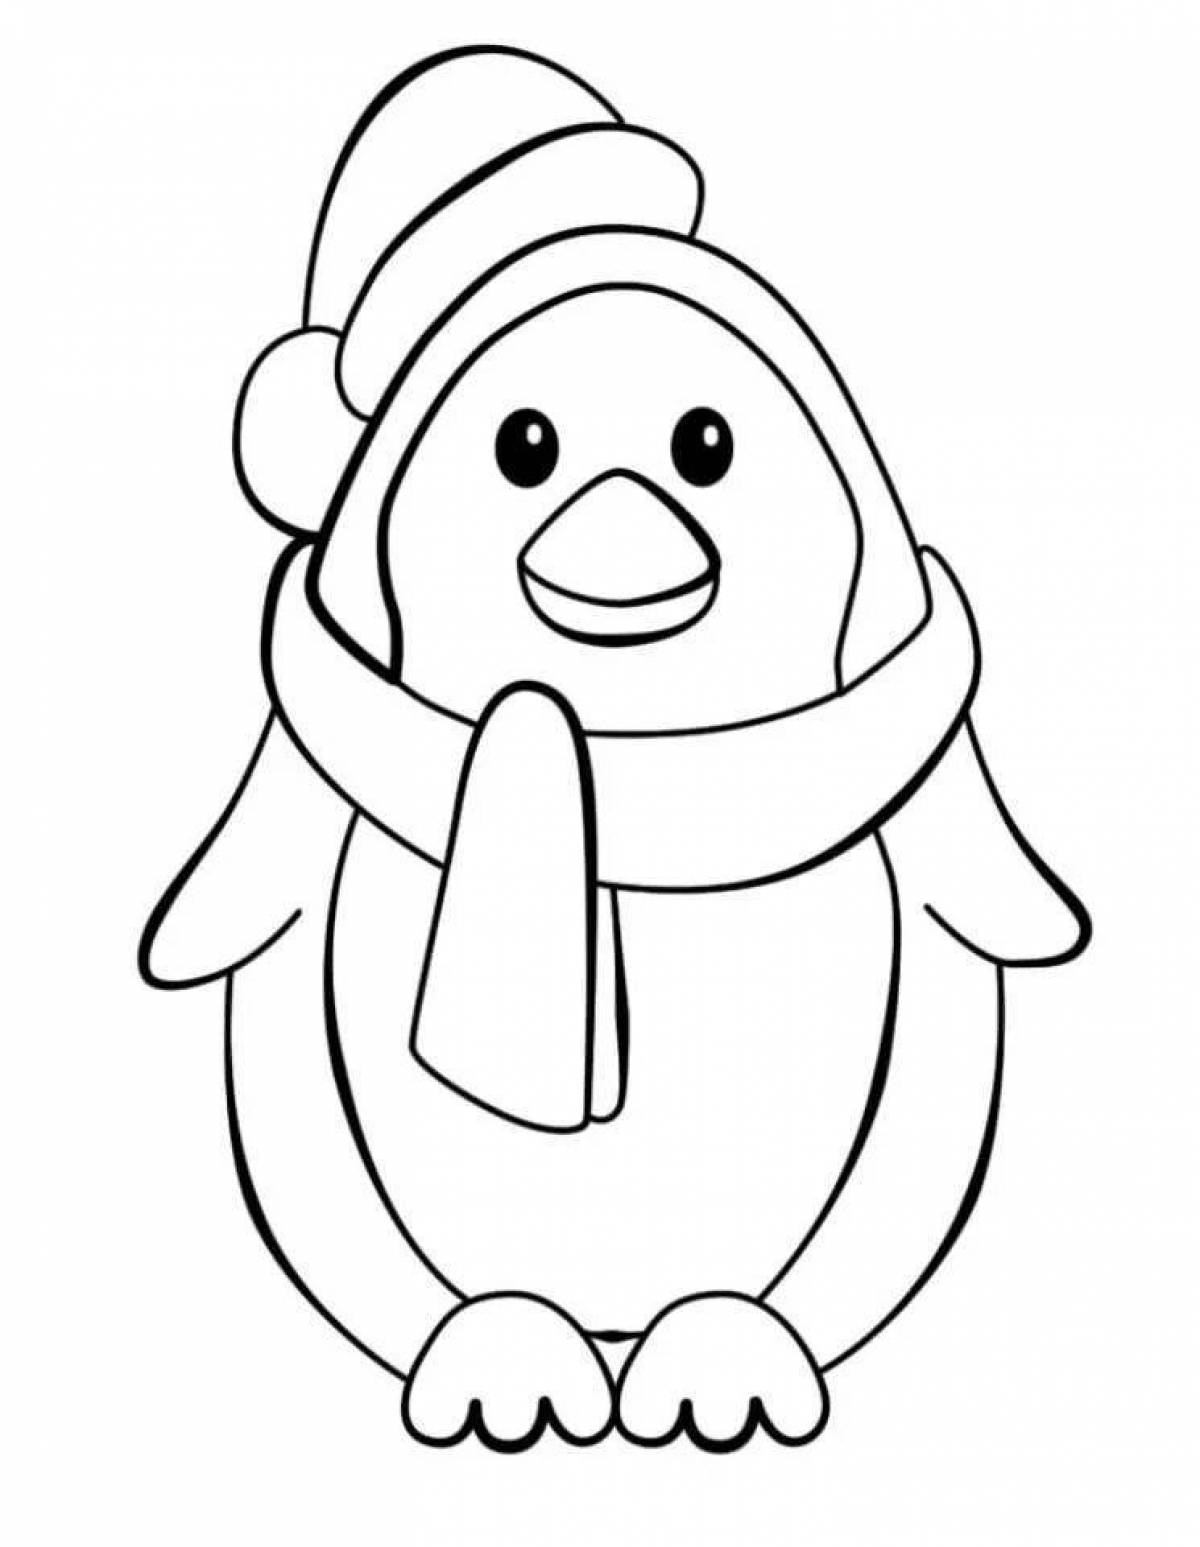 Colorful penguin coloring book